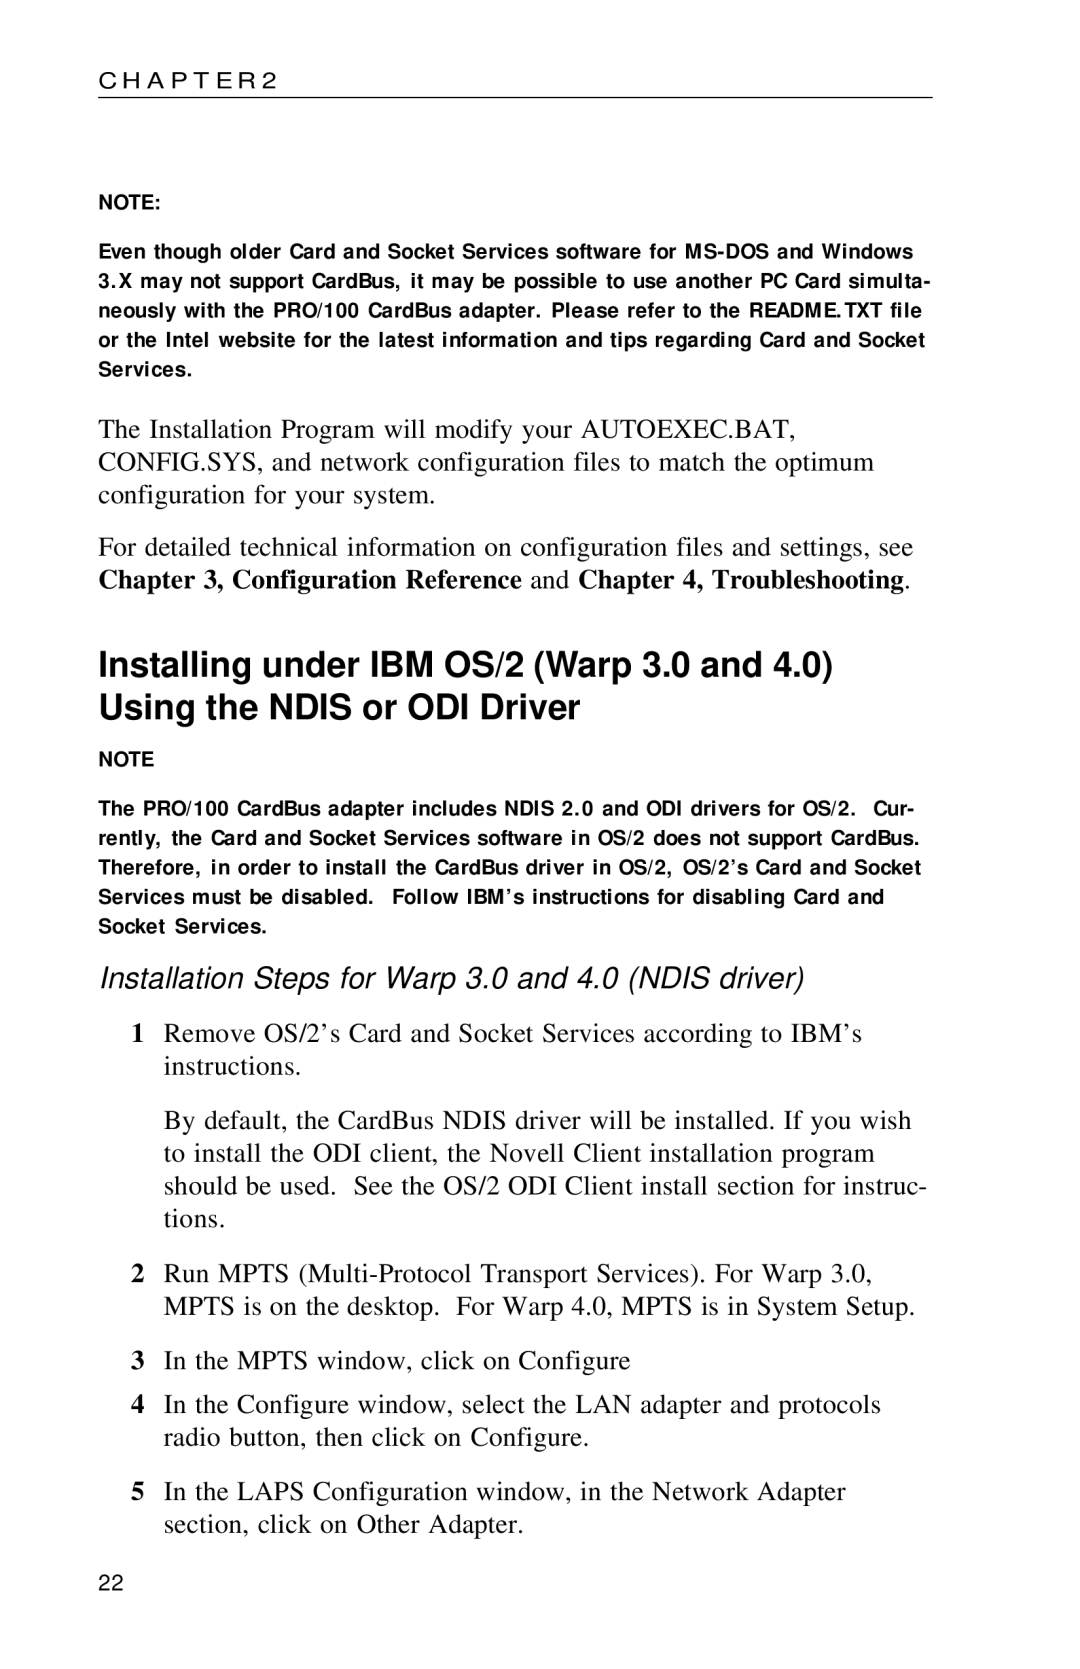 Intel PRO appendix Installation Steps for Warp 3.0 and 4.0 Ndis driver 